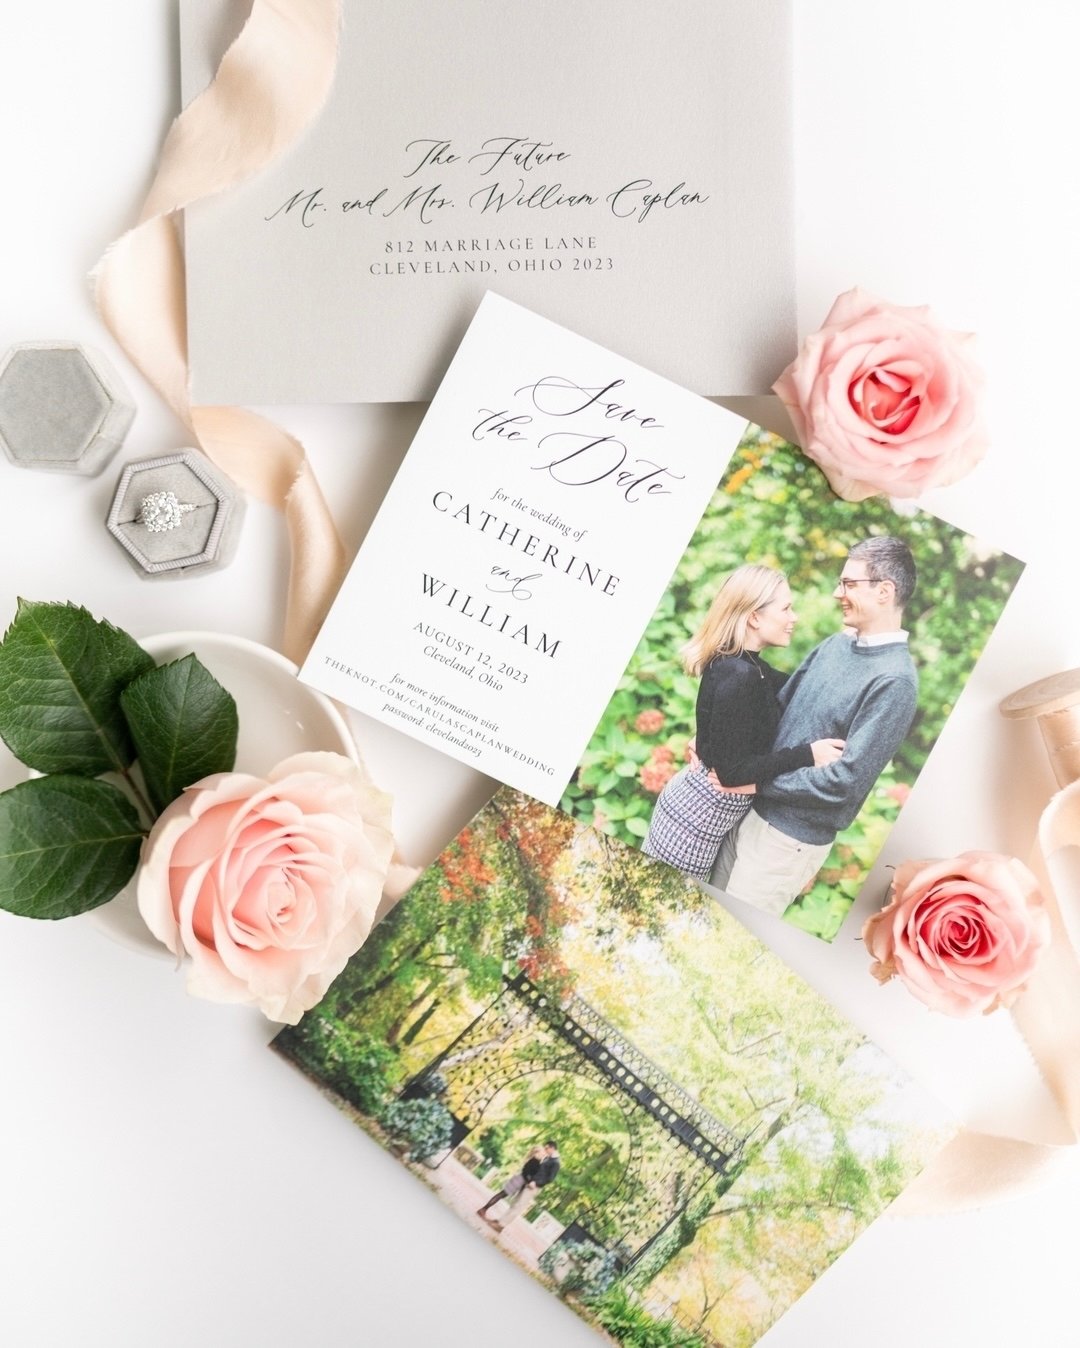 Save the dates should be out for all fall weddings at this point! Winter weddings can certainly mail out now as well. 
.
.
.
 #impressdesignstudio #impressinvitations #wedding #invitations #weddinginvitations #weddingstationery #weddingstationary #le